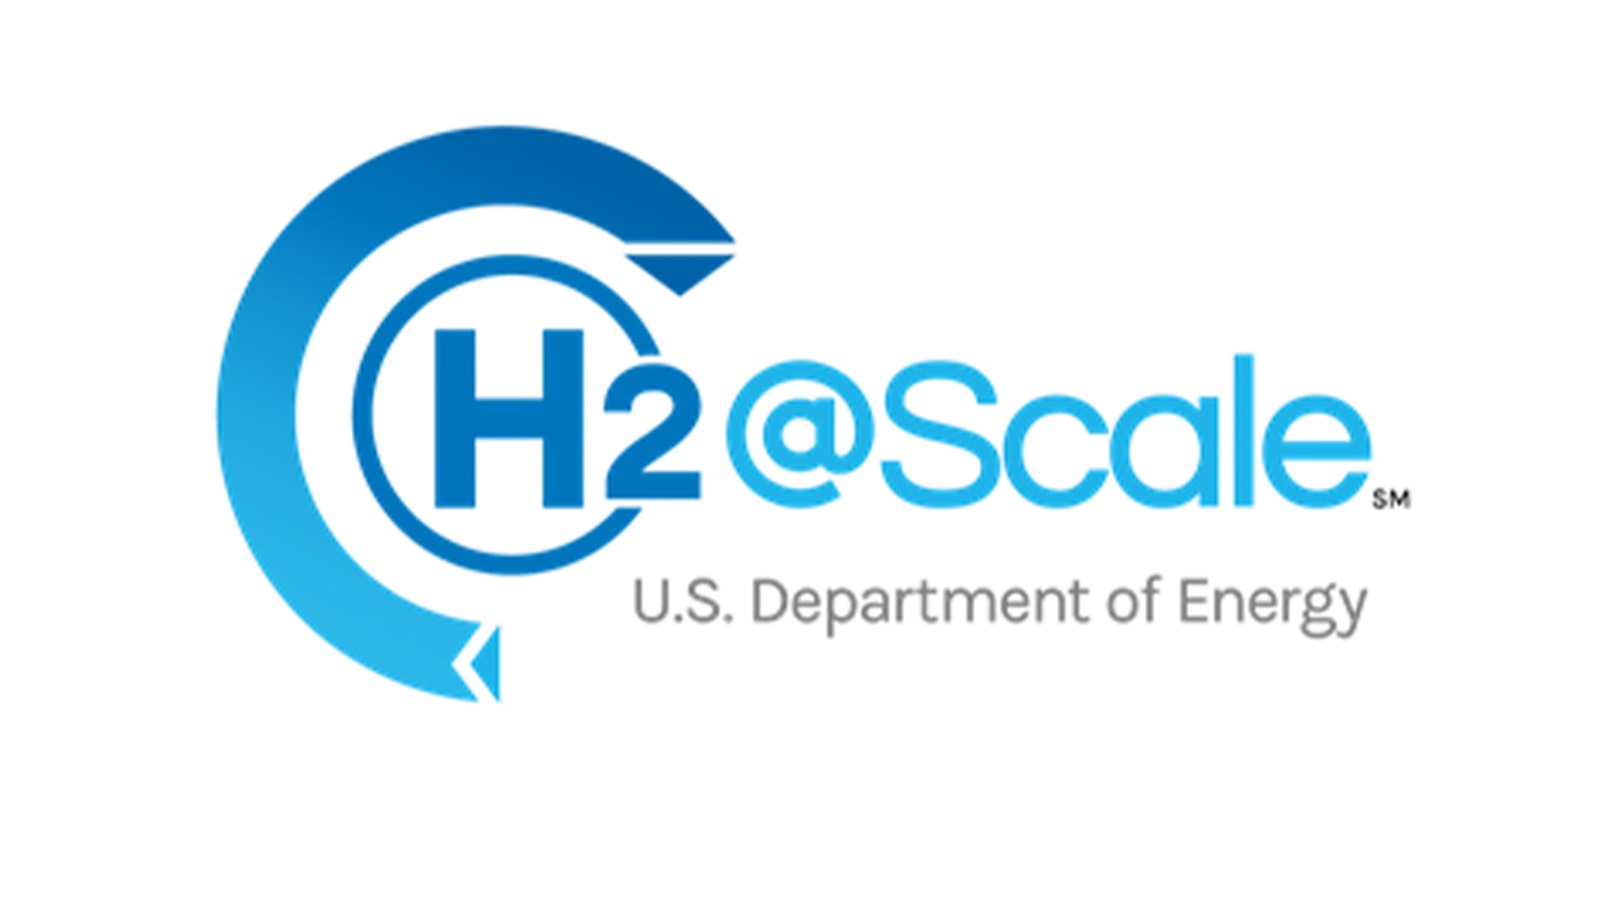 The H2@Scale logo, which represents a U.S. Department of Energy (DOE) initiative. (Image by U.S. DOE Hydrogen and Fuel Cell Technologies Office.)